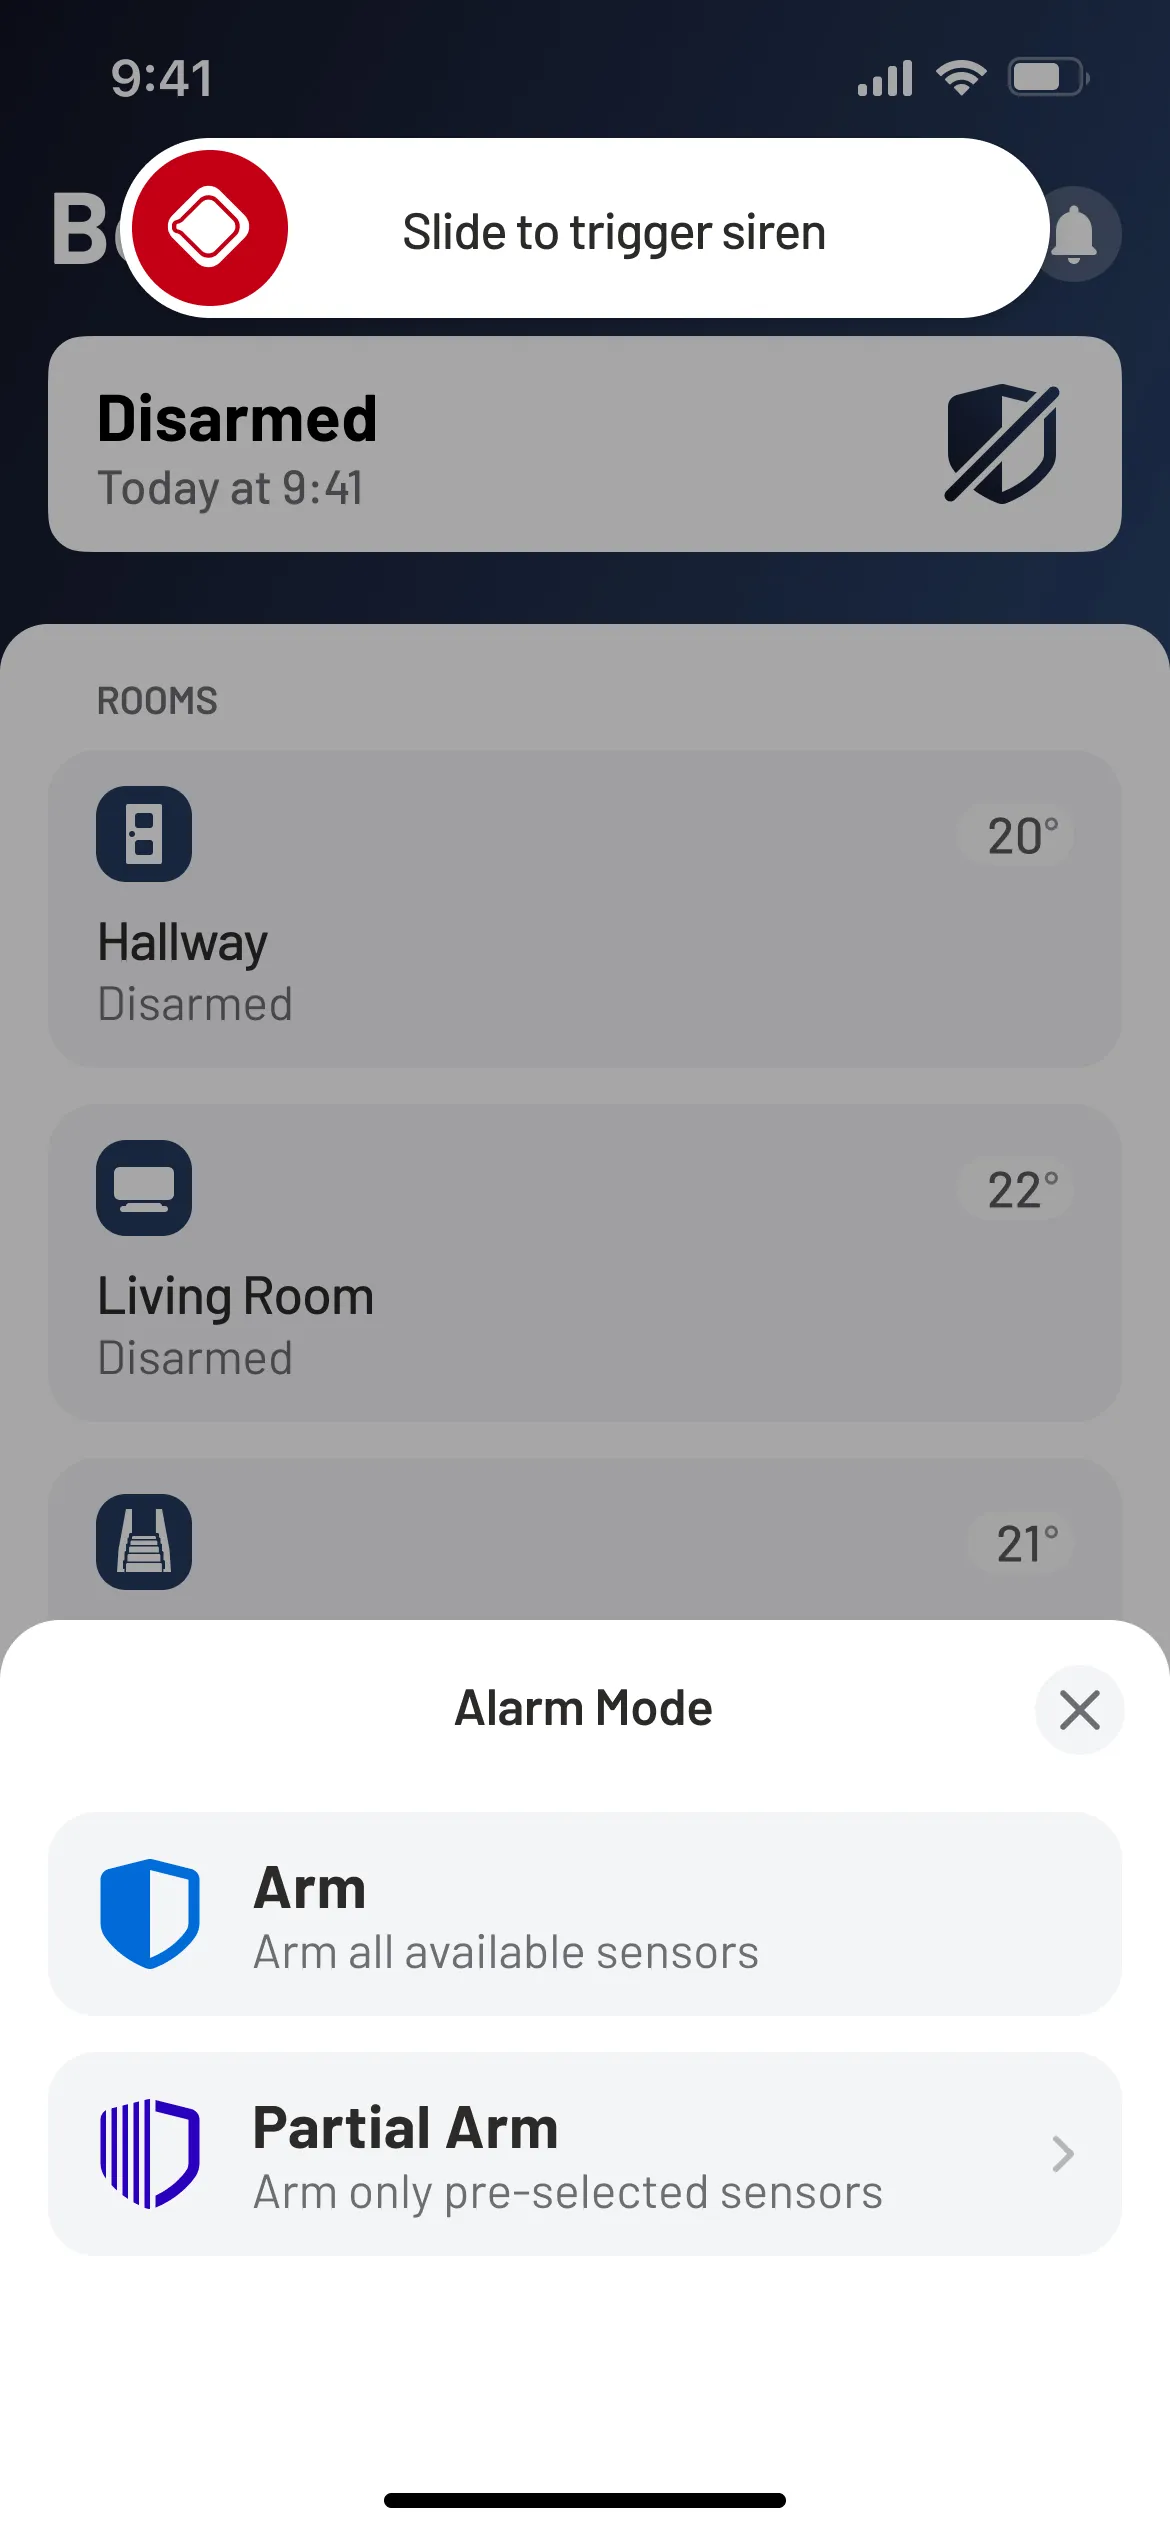 Screenshot of a smartphone displaying the Home Screen of a smart alarm system app. The top of the screen shows a red shield icon with a message 'Slide to trigger siren' indicating a gesture-based control. The alarm system is in 'Disarmed' mode. Below, there are temperature readings next to room names: 'Hallway' at 20 degrees Celsius, 'Living Room' at 22 degrees, both marked as disarmed. At the bottom, two options are shown under 'Alarm Mode': a blue shield icon labeled 'Arm' to arm all available sensors, and a blue-striped shield icon labeled 'Partial Arm' for arming only pre-selected sensors.